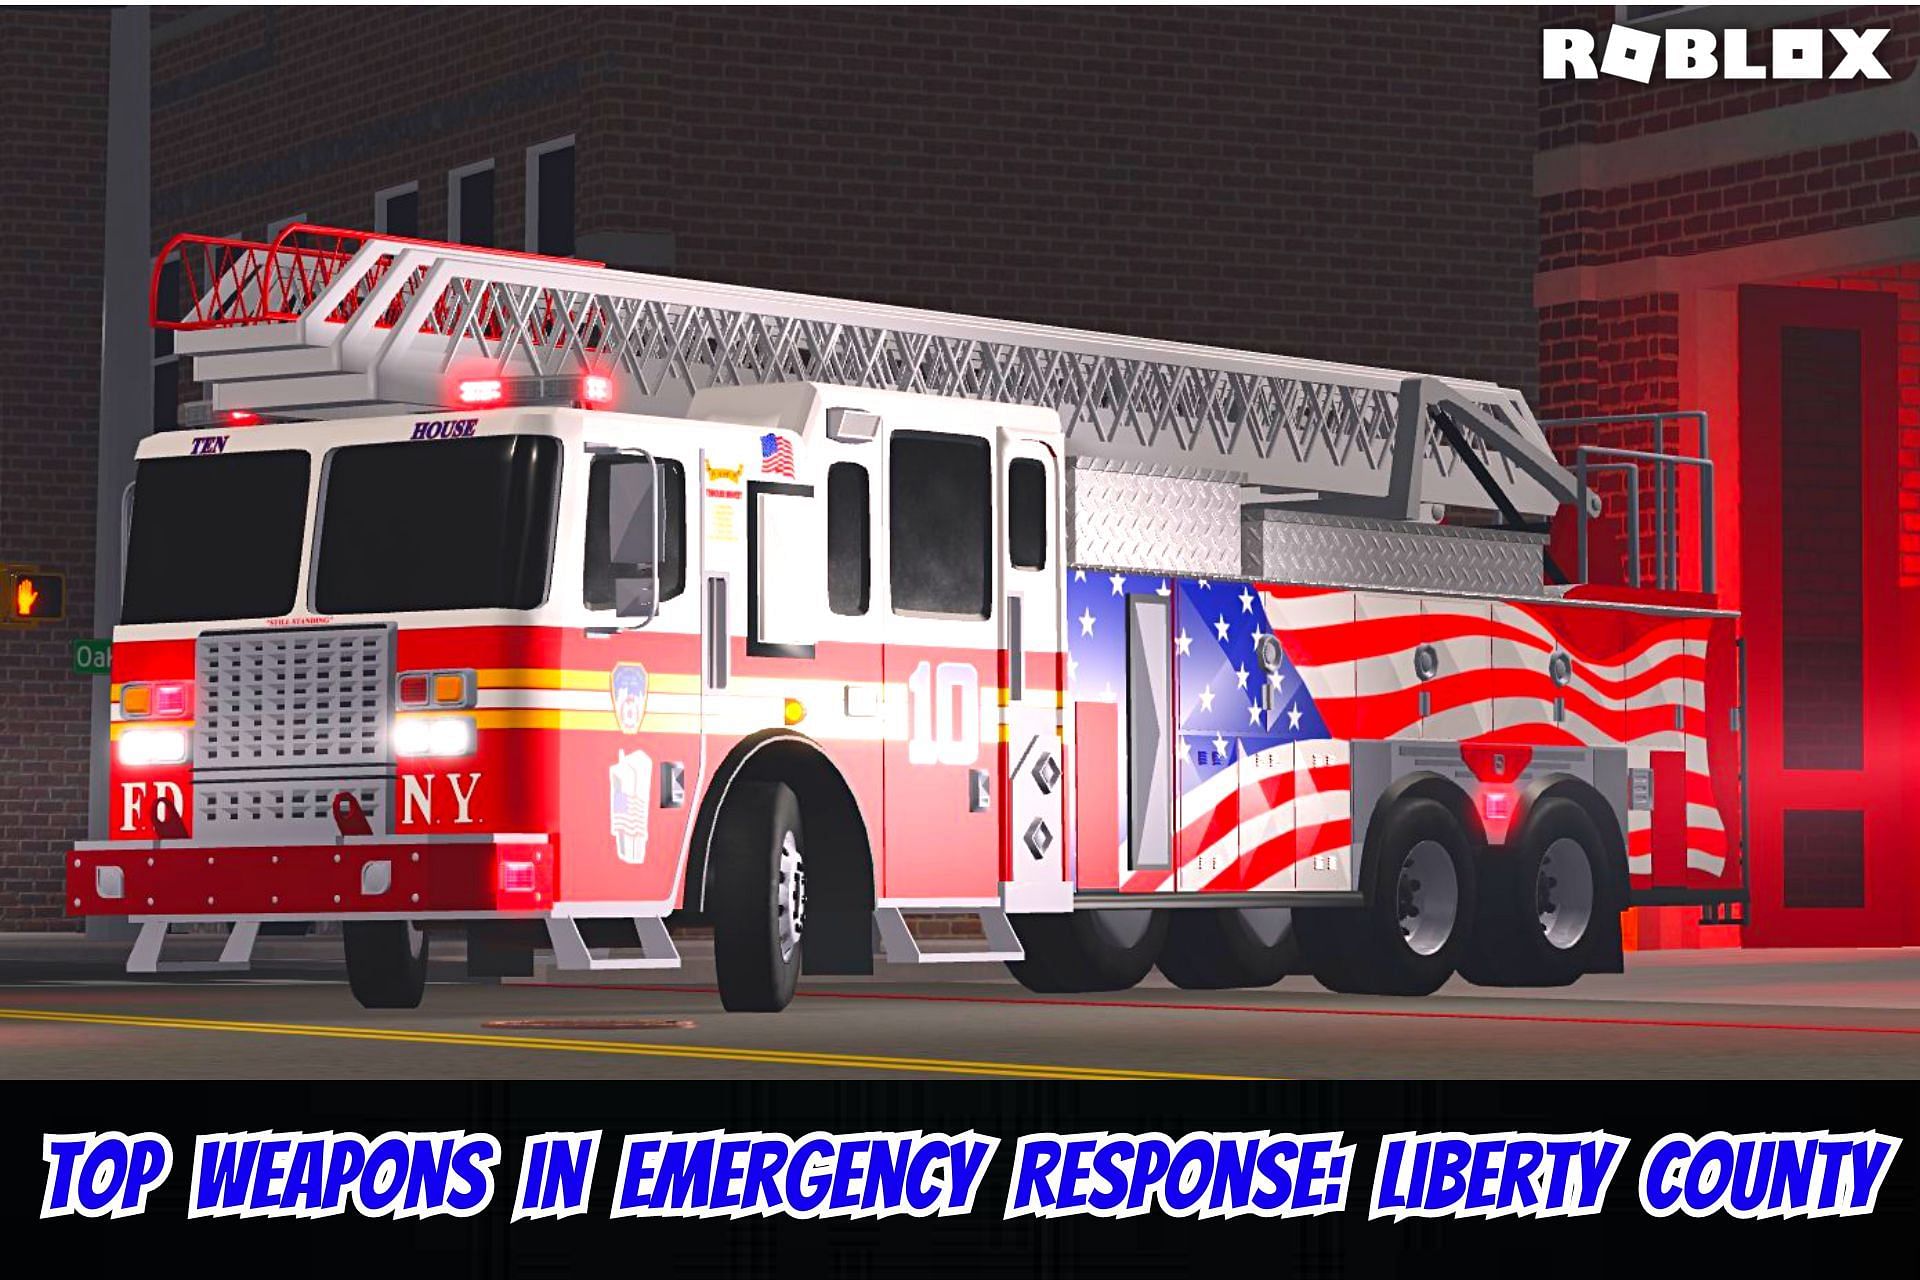 5 best weapons in Roblox Emergency Response: Liberty County